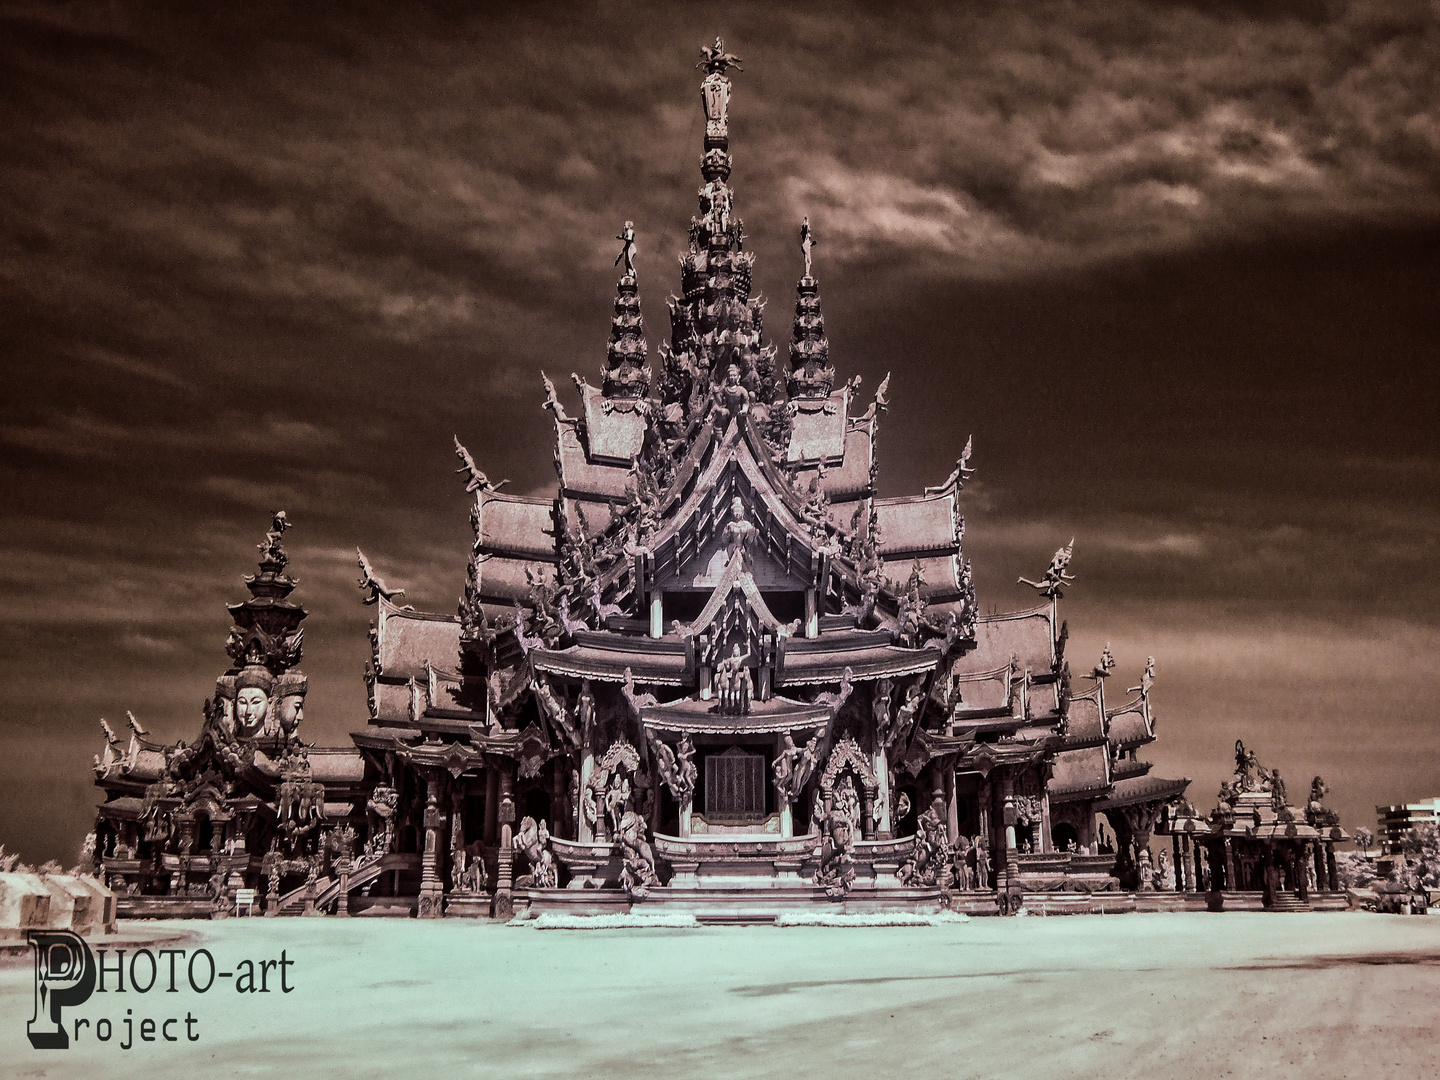 The Sanctuary of Truth infrared